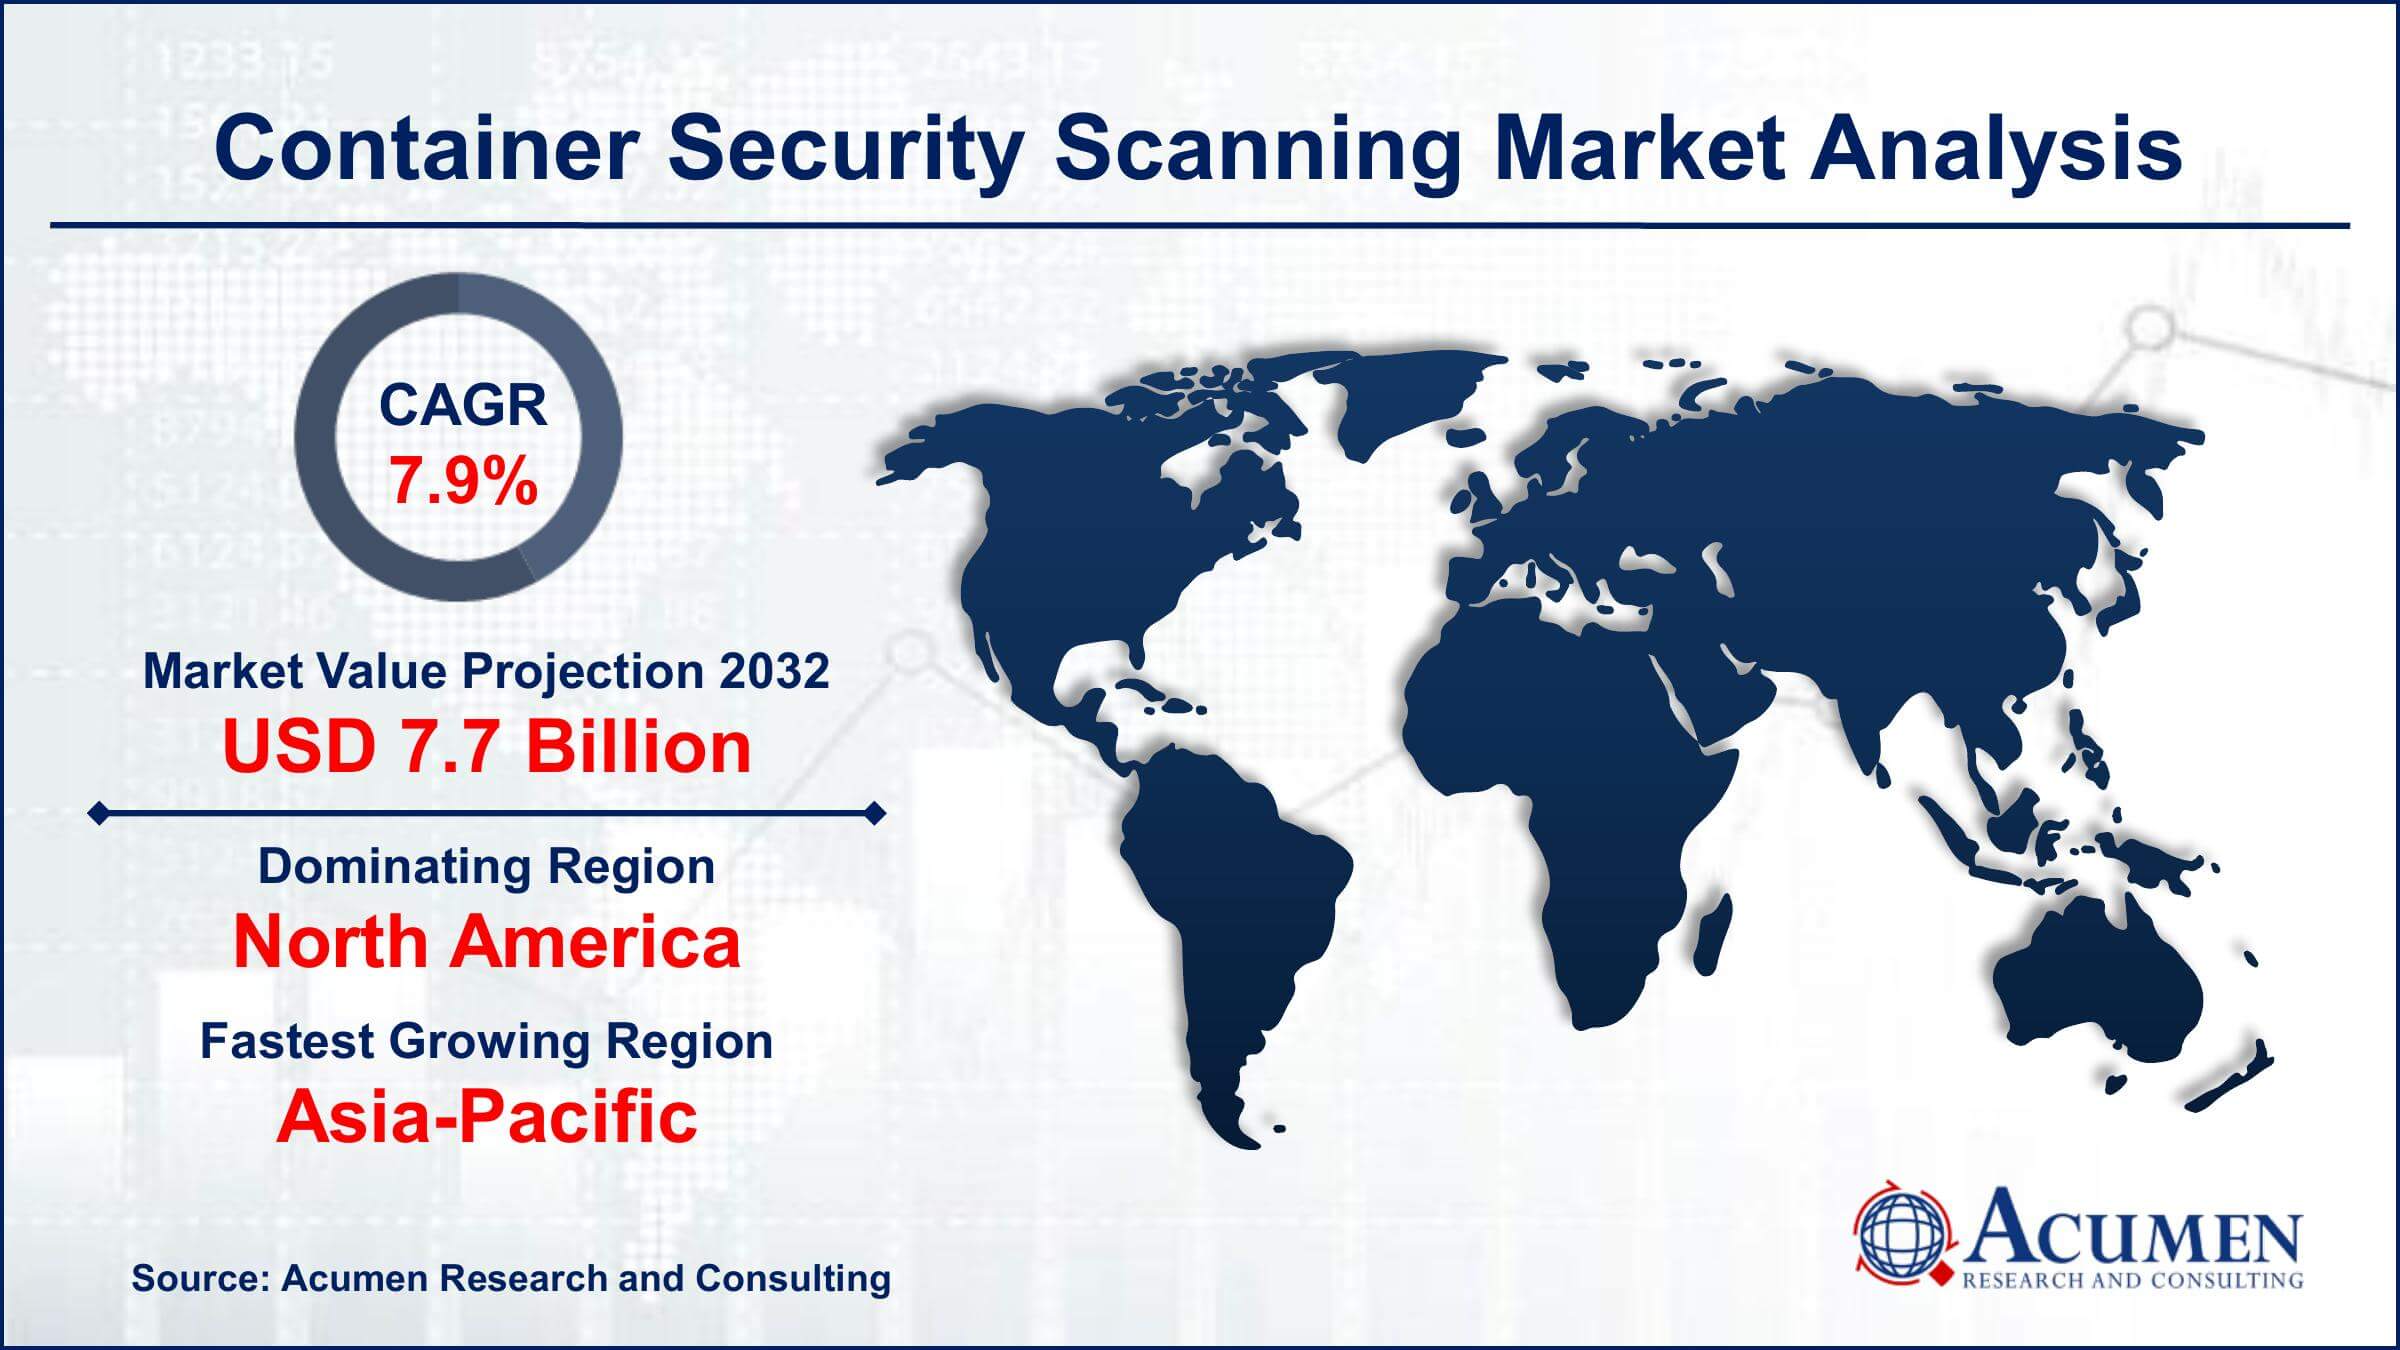 Global Container Security Scanning Market Trends